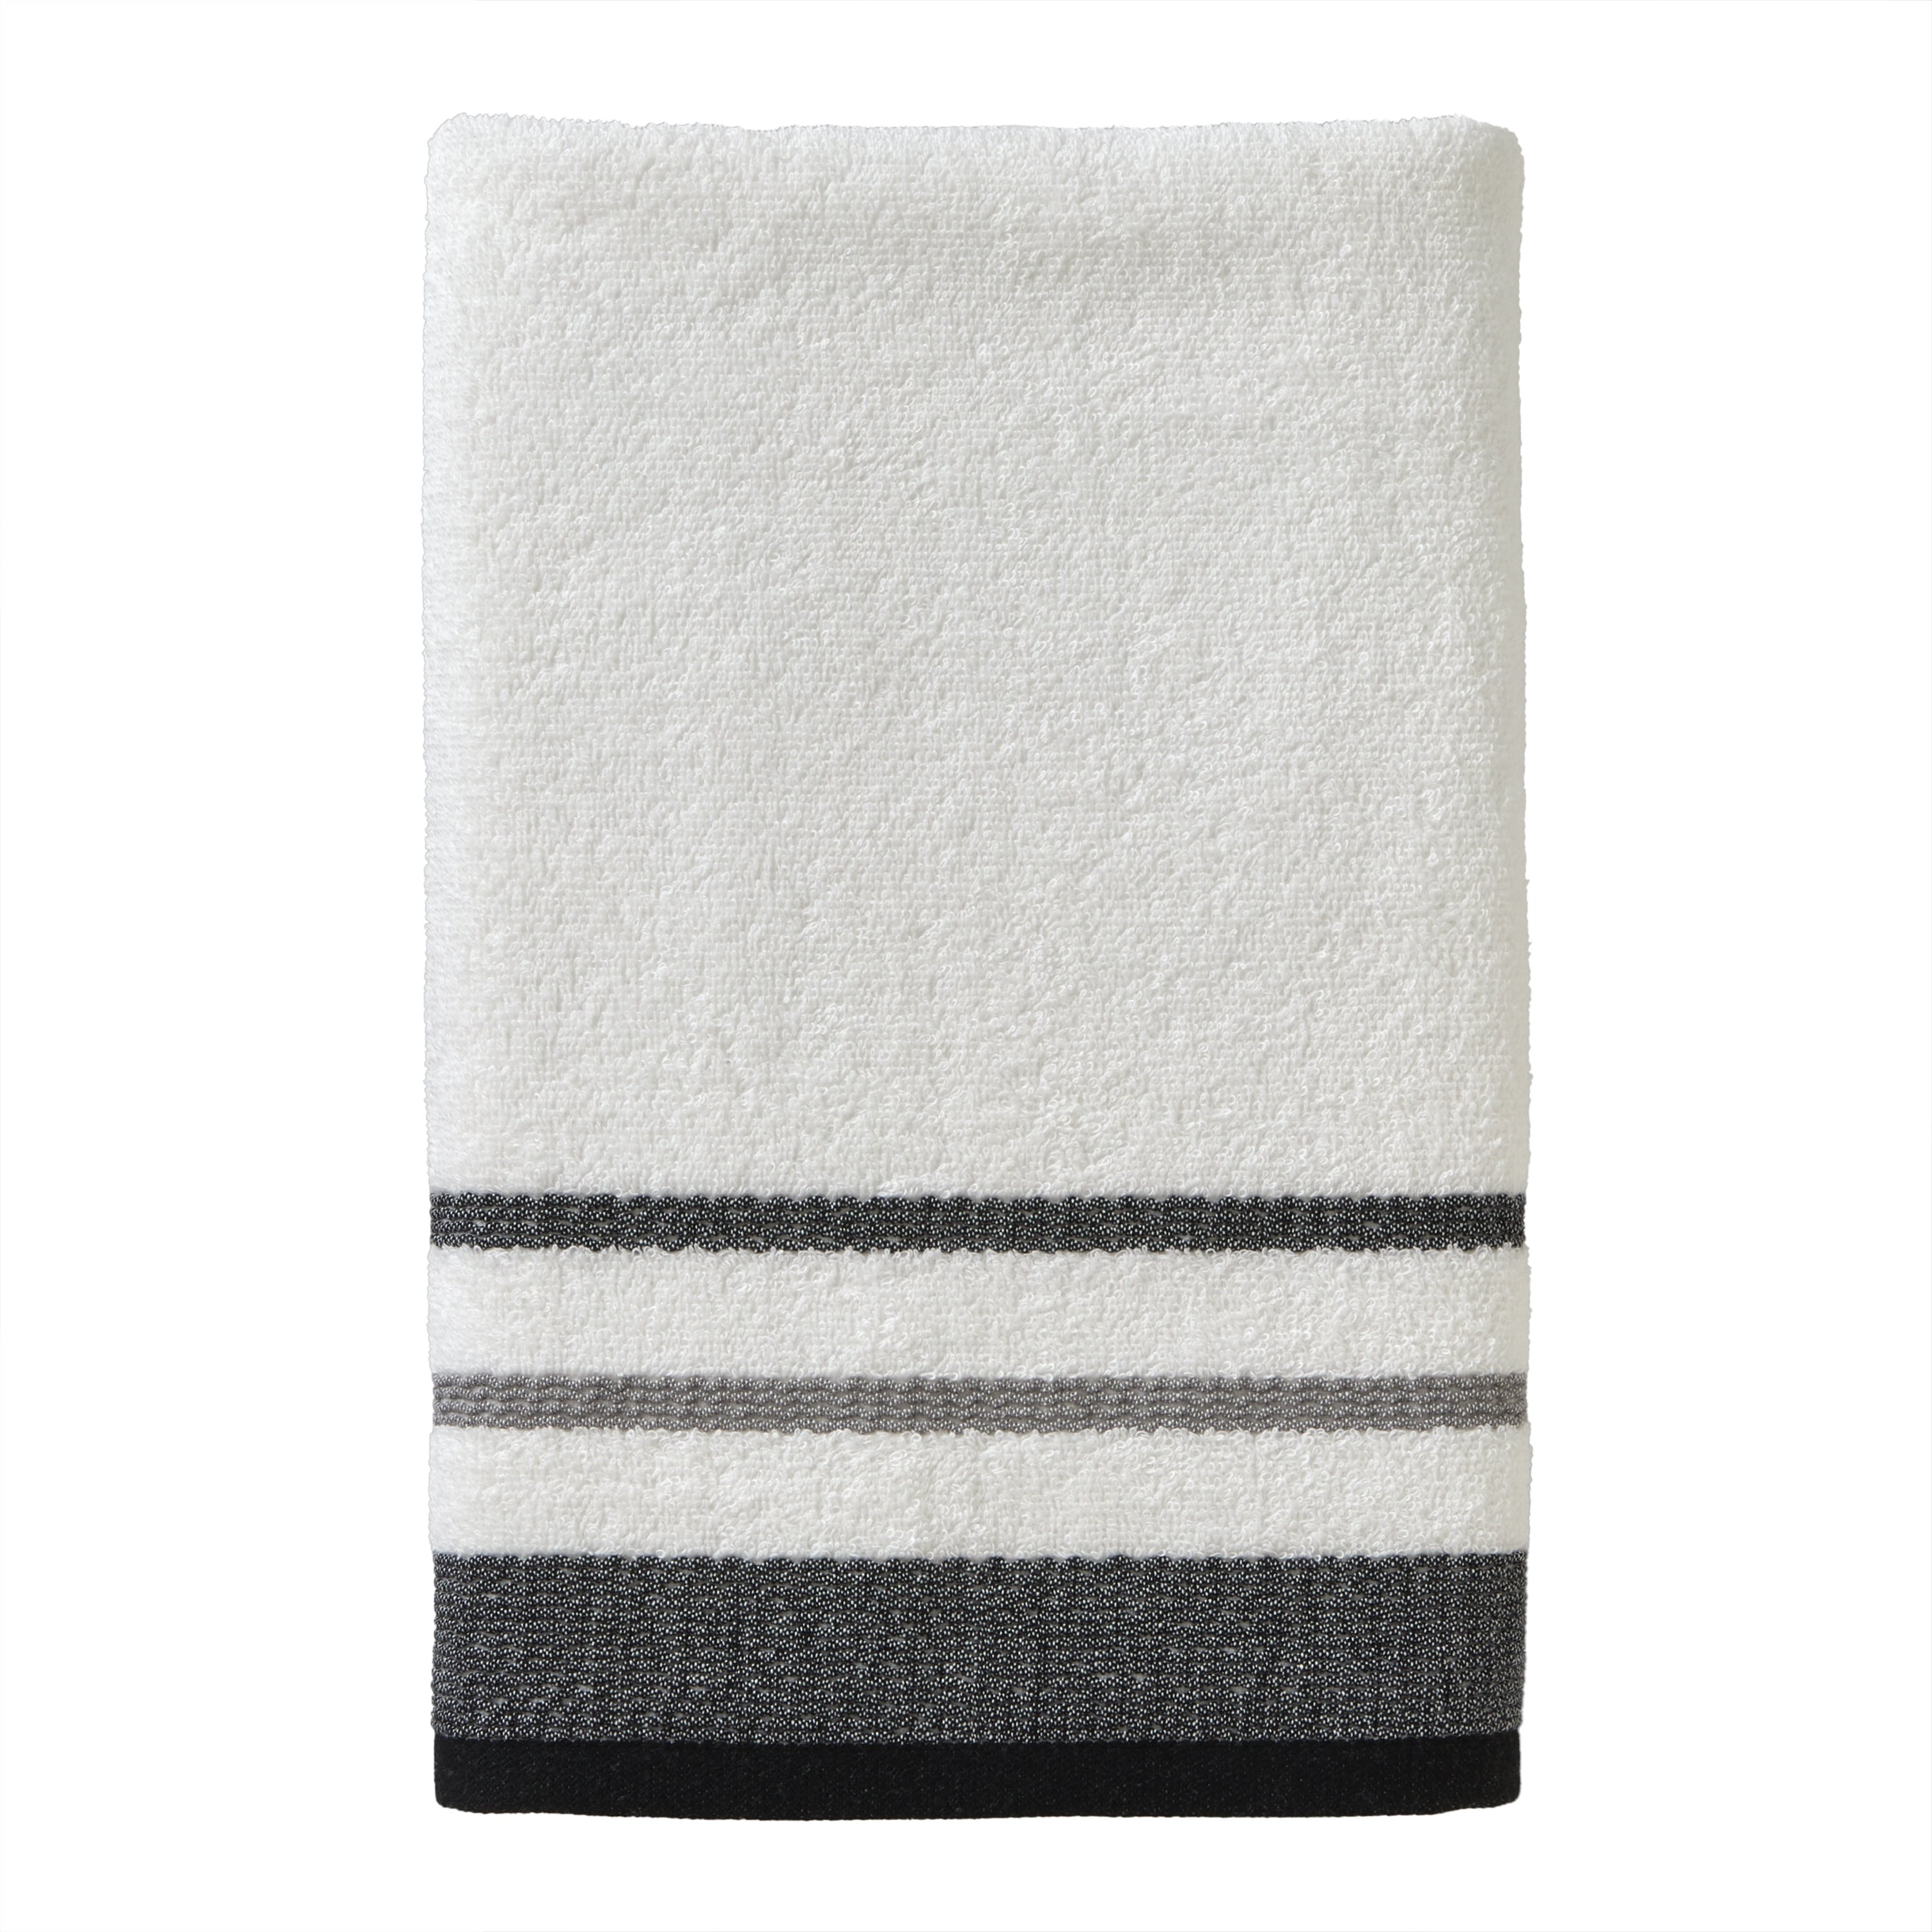  xigua 2 Pieces Black and White Buffalo Plaid Bath Towels Set,  Absorbent Soft Skin-Friendly Easy Care Shower Towels for Bathroom Tub Pool  Gym Camp Travel College Dorm Hotel 14.4x28.3 : Home